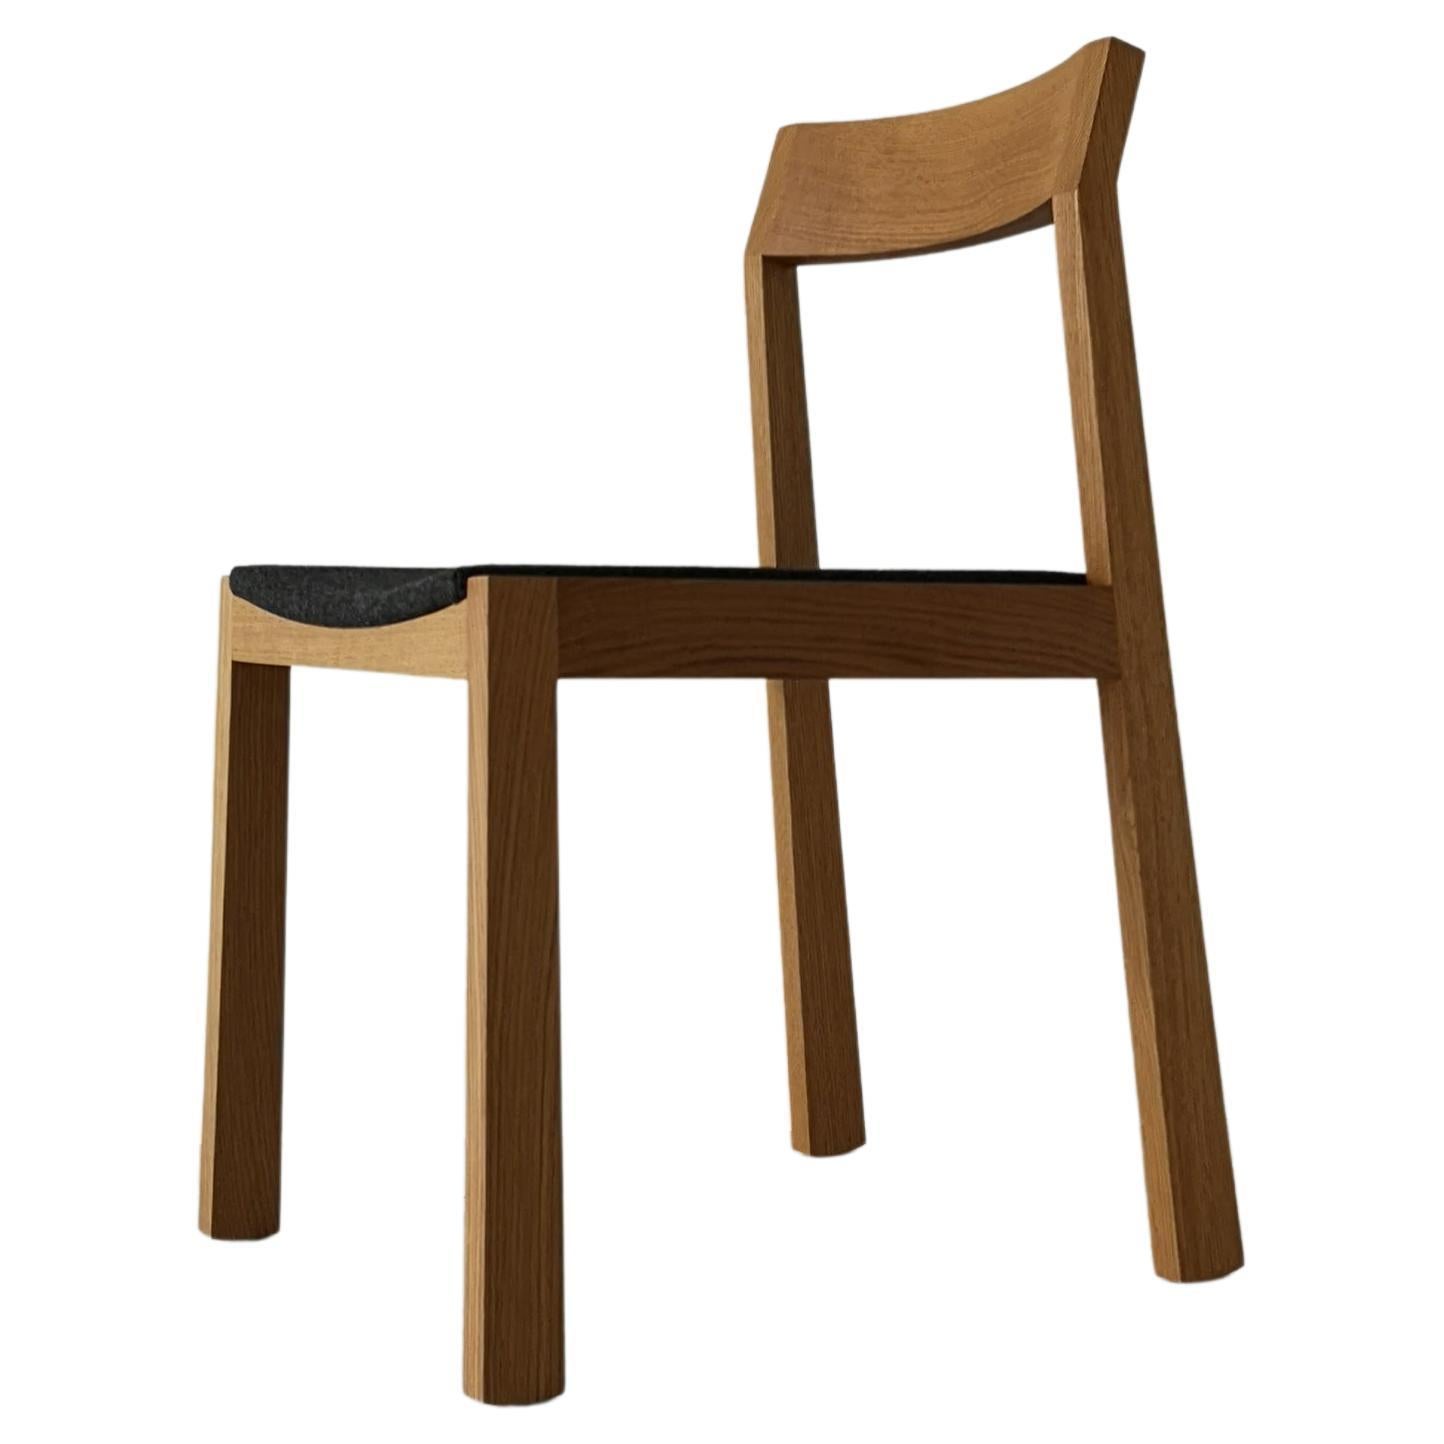 a+ Solid Hardwood Upholstered Dining Chair by Izm Design